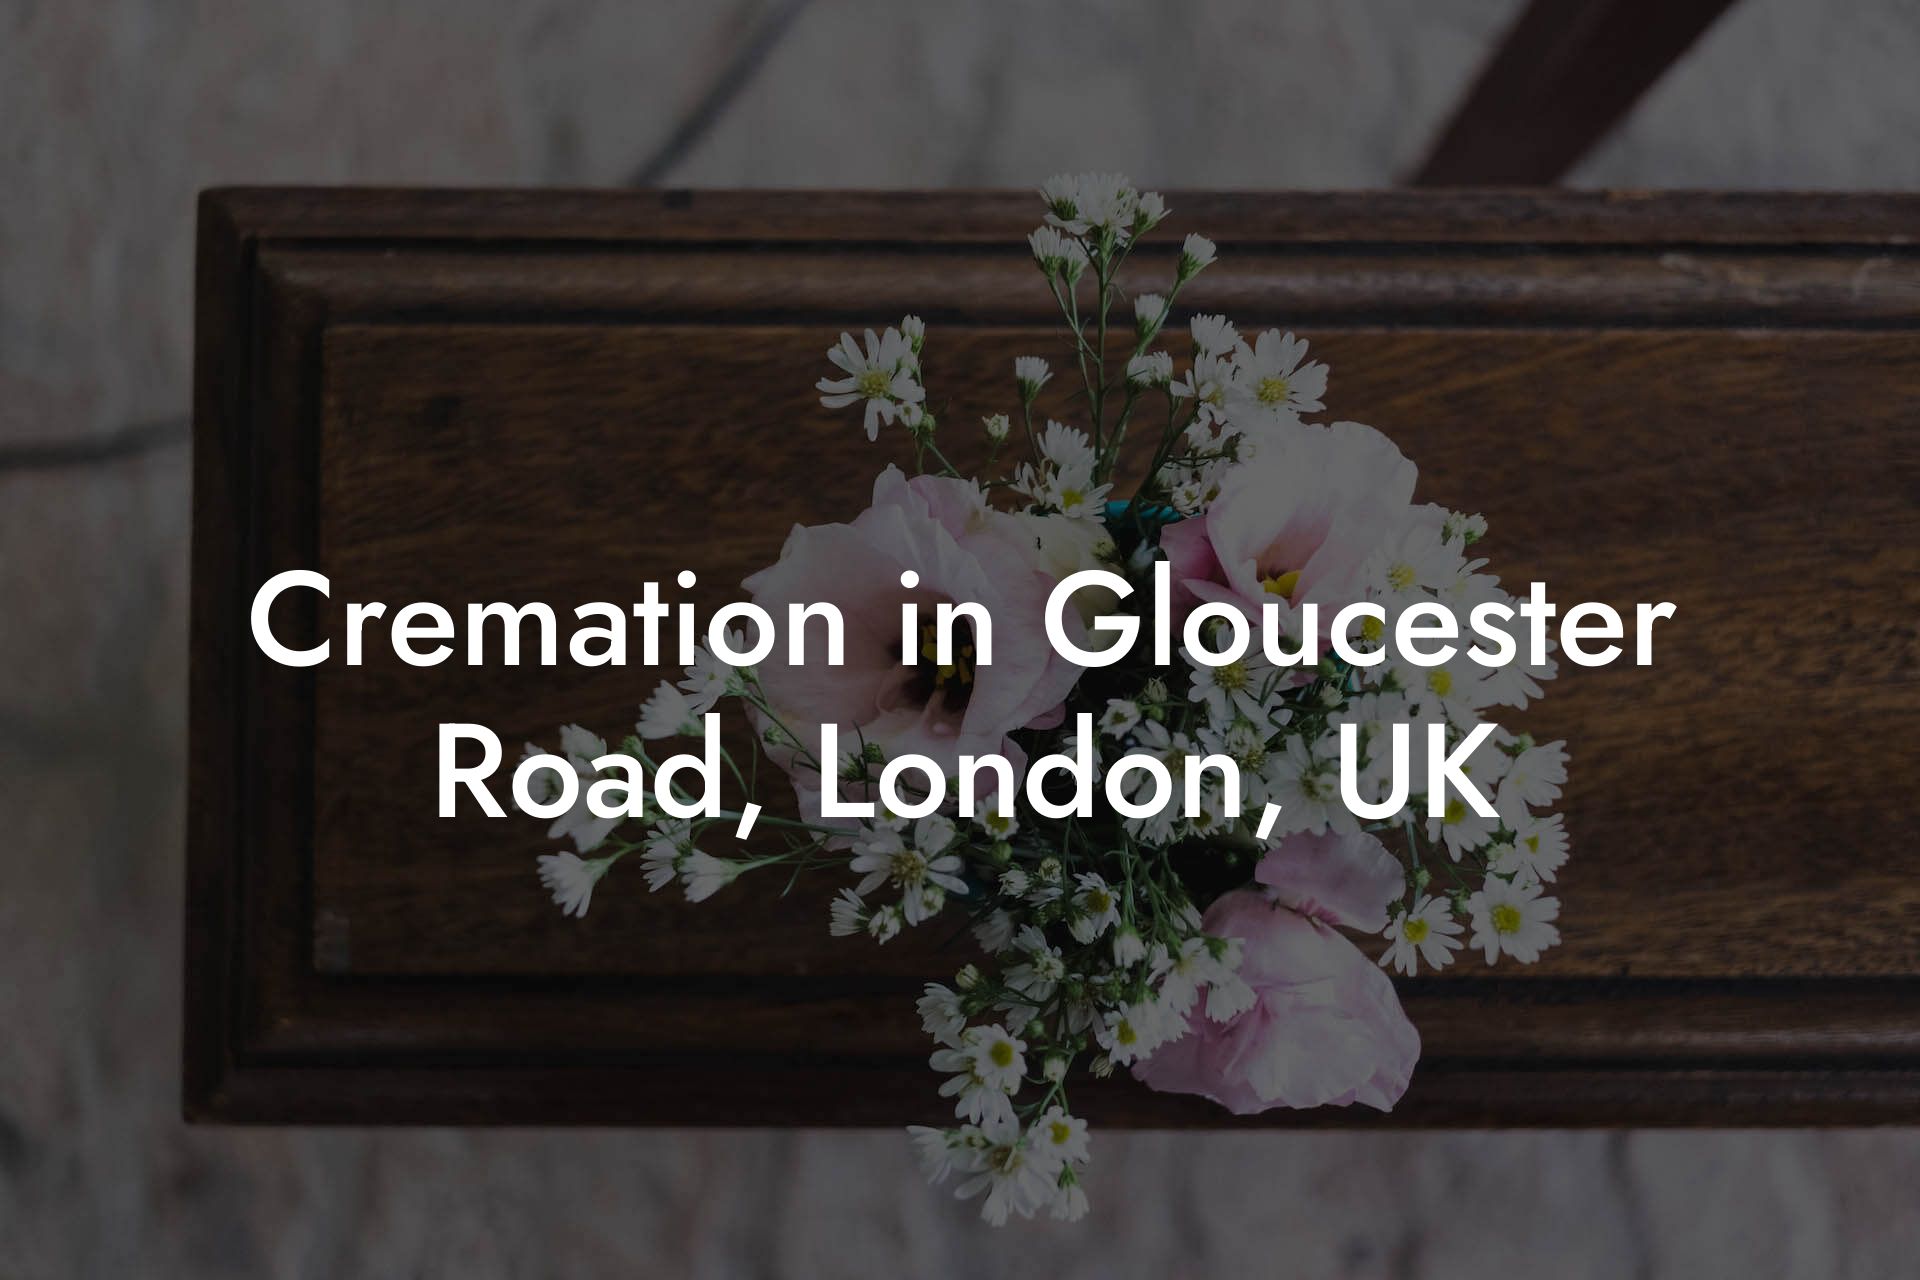 Cremation in Gloucester Road, London, UK